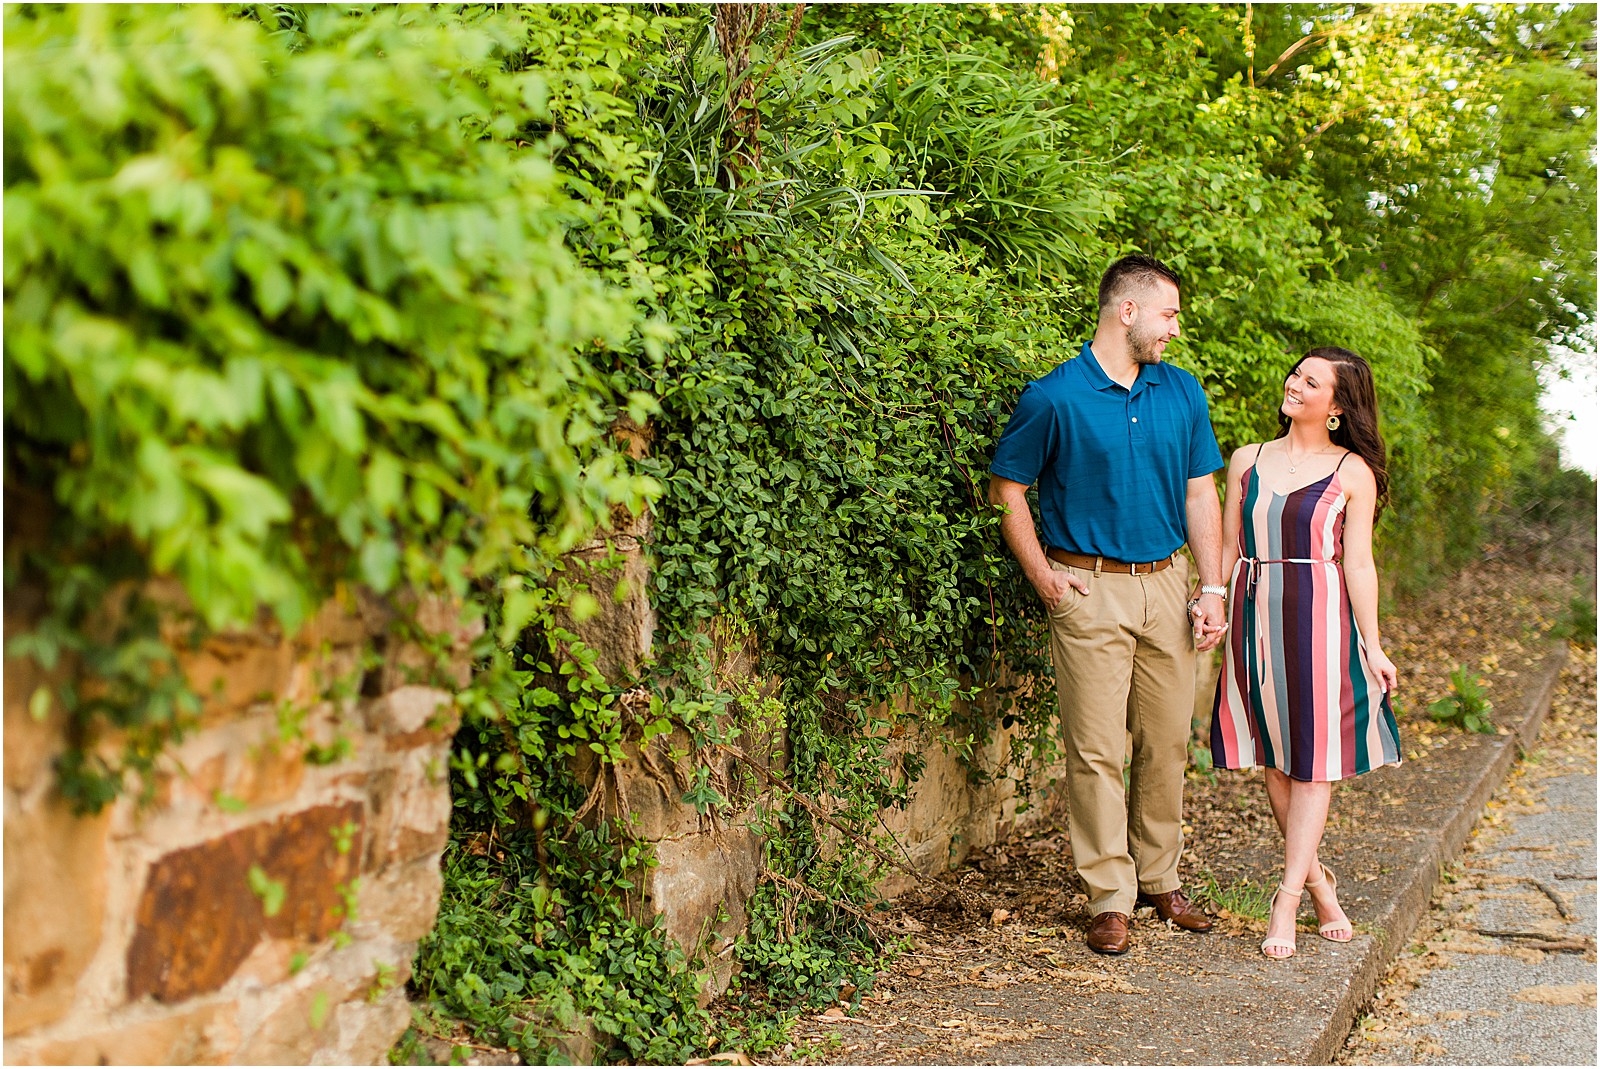 Downtown Newburgh Engagement Session | Matt and Blaire | Bret and Brandie Photography009.jpg